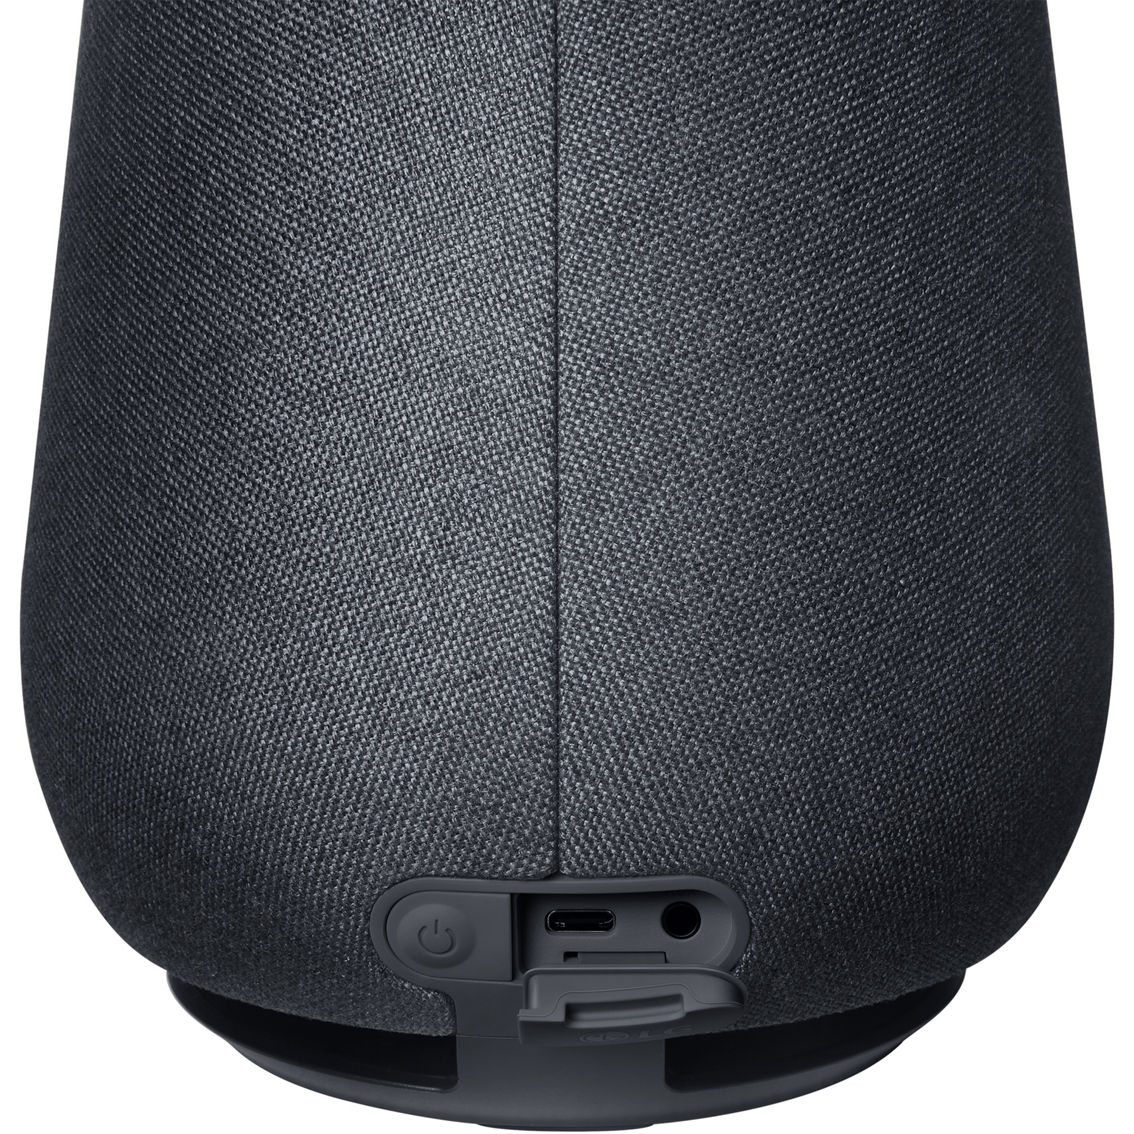 LG XBOOM 360 Portable Bluetooth Speaker with Omnidirectional Sound - Image 8 of 8